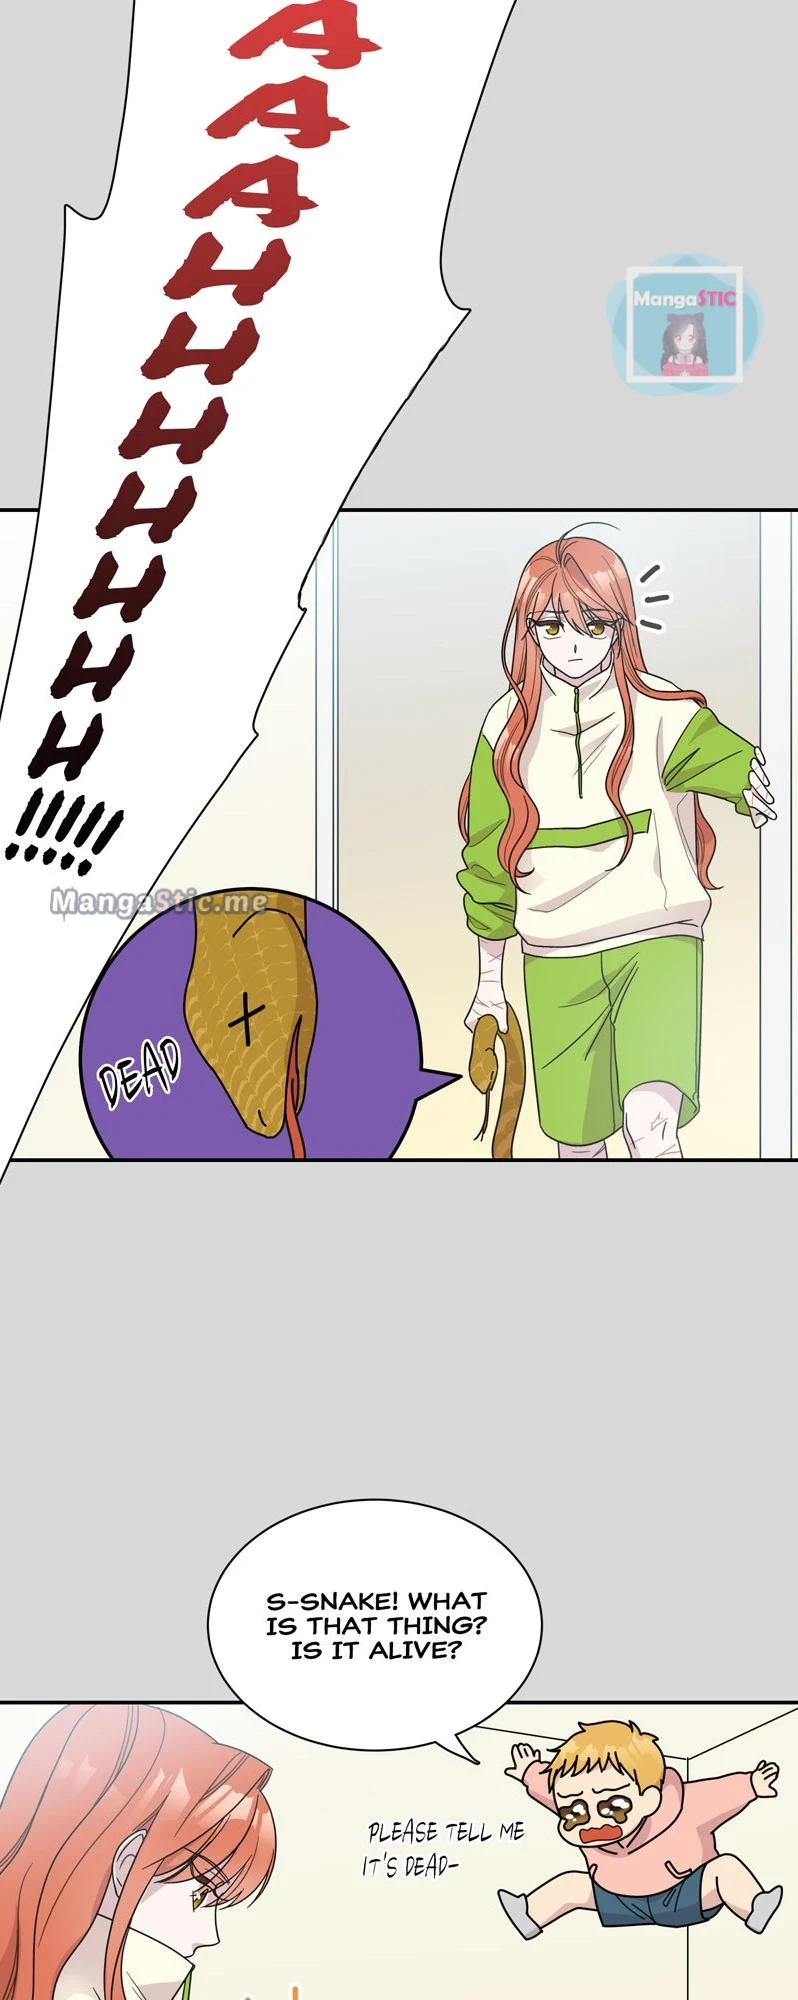 The Beastly Girl chapter 4